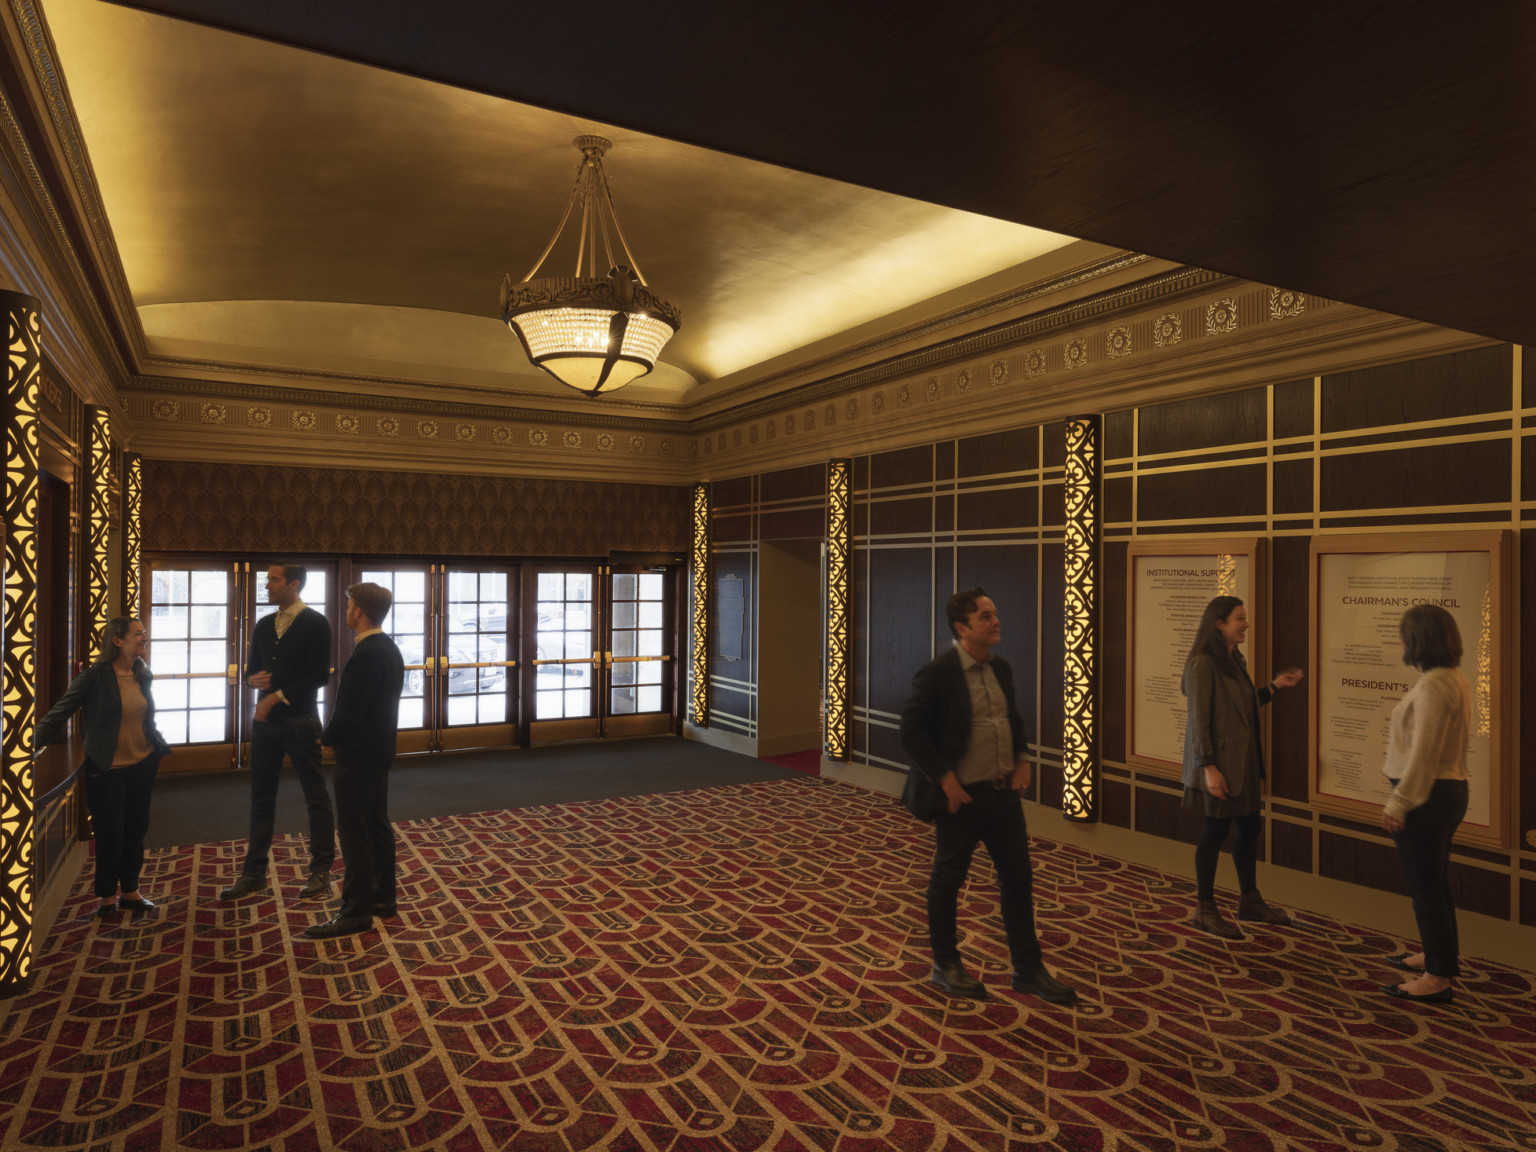 Entry to theater with multiple glass double doors, patterned carpet, information on walls framed by illuminated art deco columns